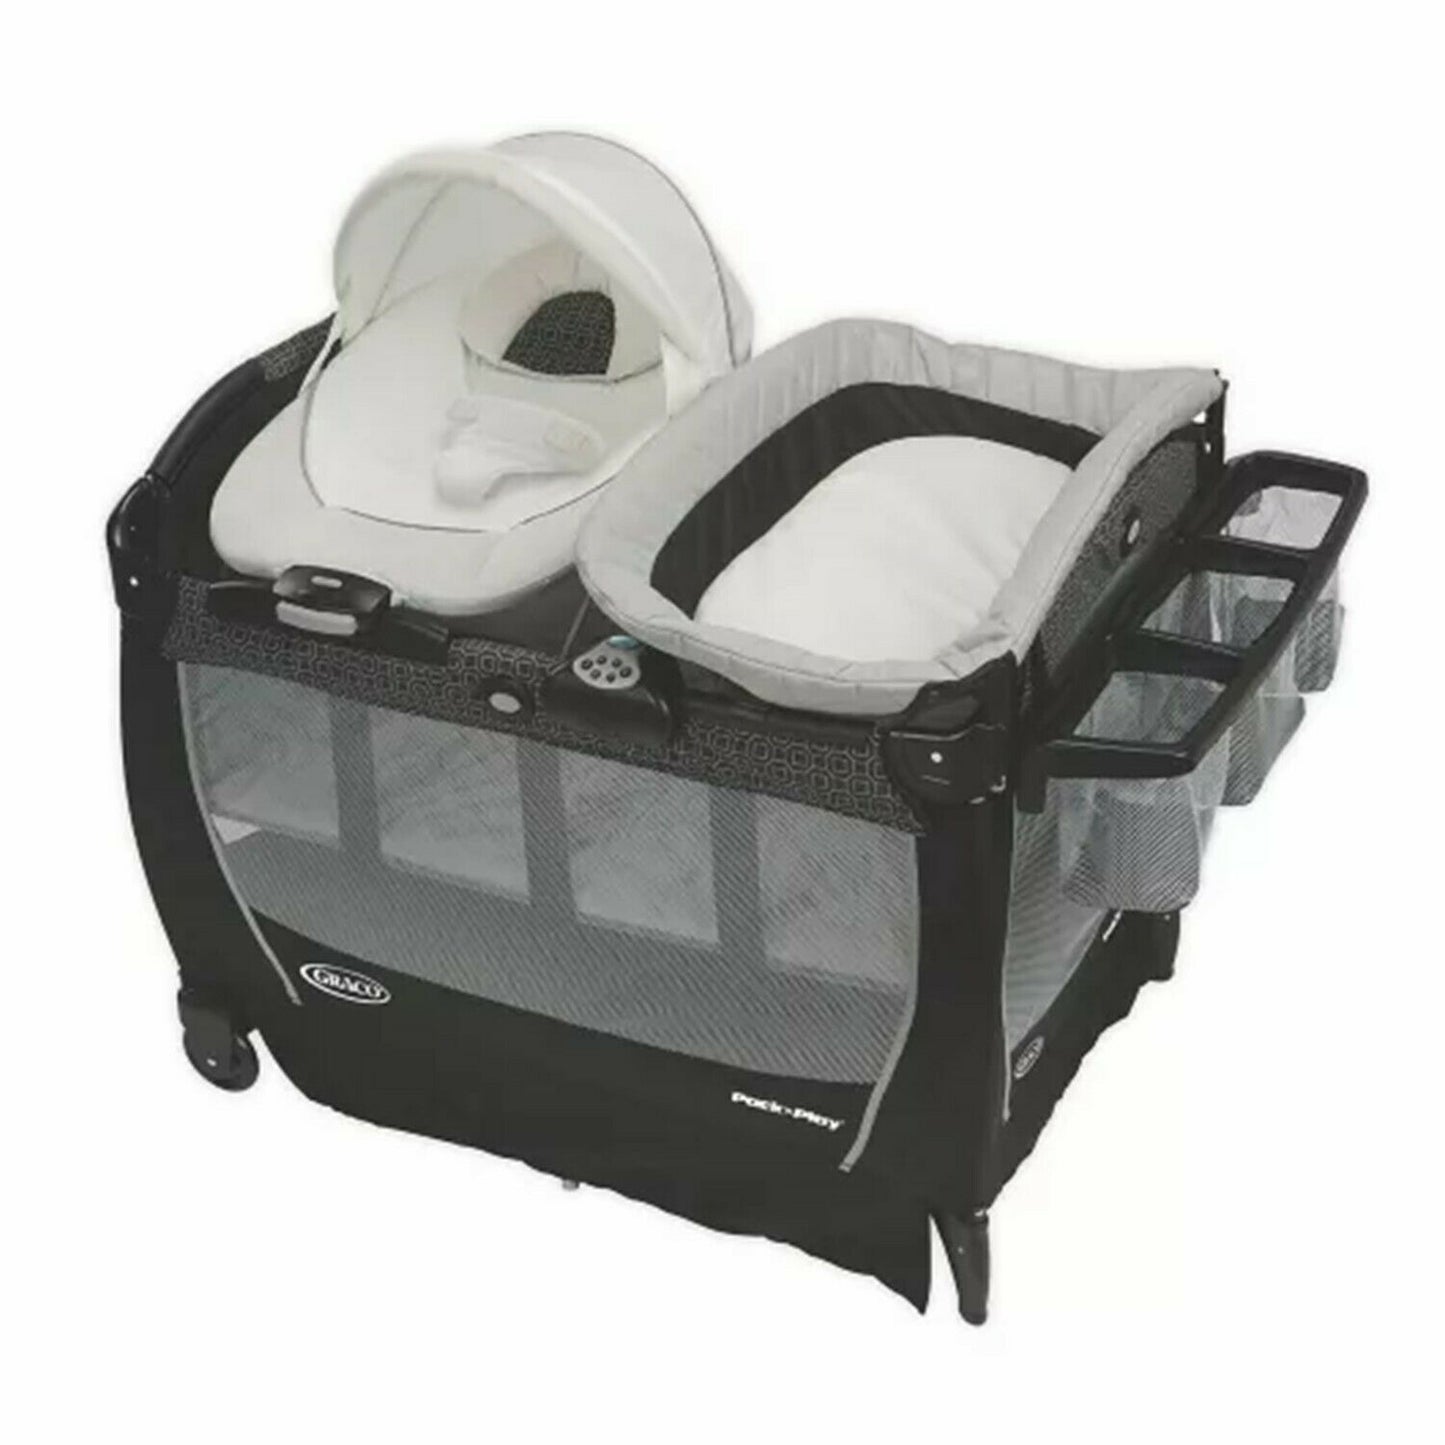 Graco Baby Stroller with Car Seat Travel System Infant Playard High Chair Combo